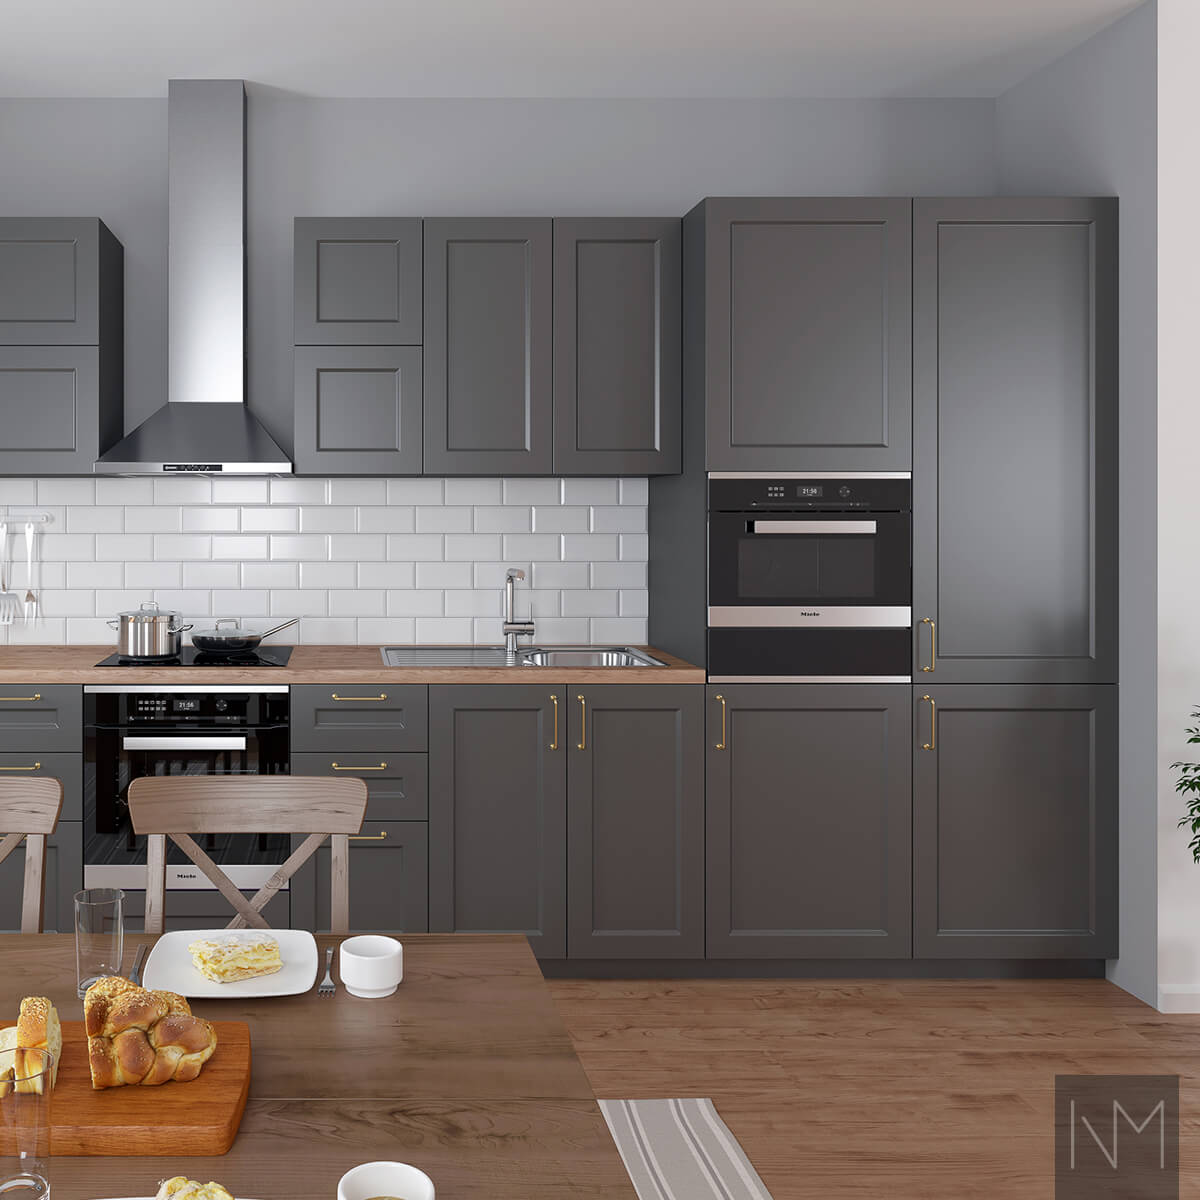 IKEA Metod or Faktum kitchen CLASSIC. Colour NCS S-7500-N